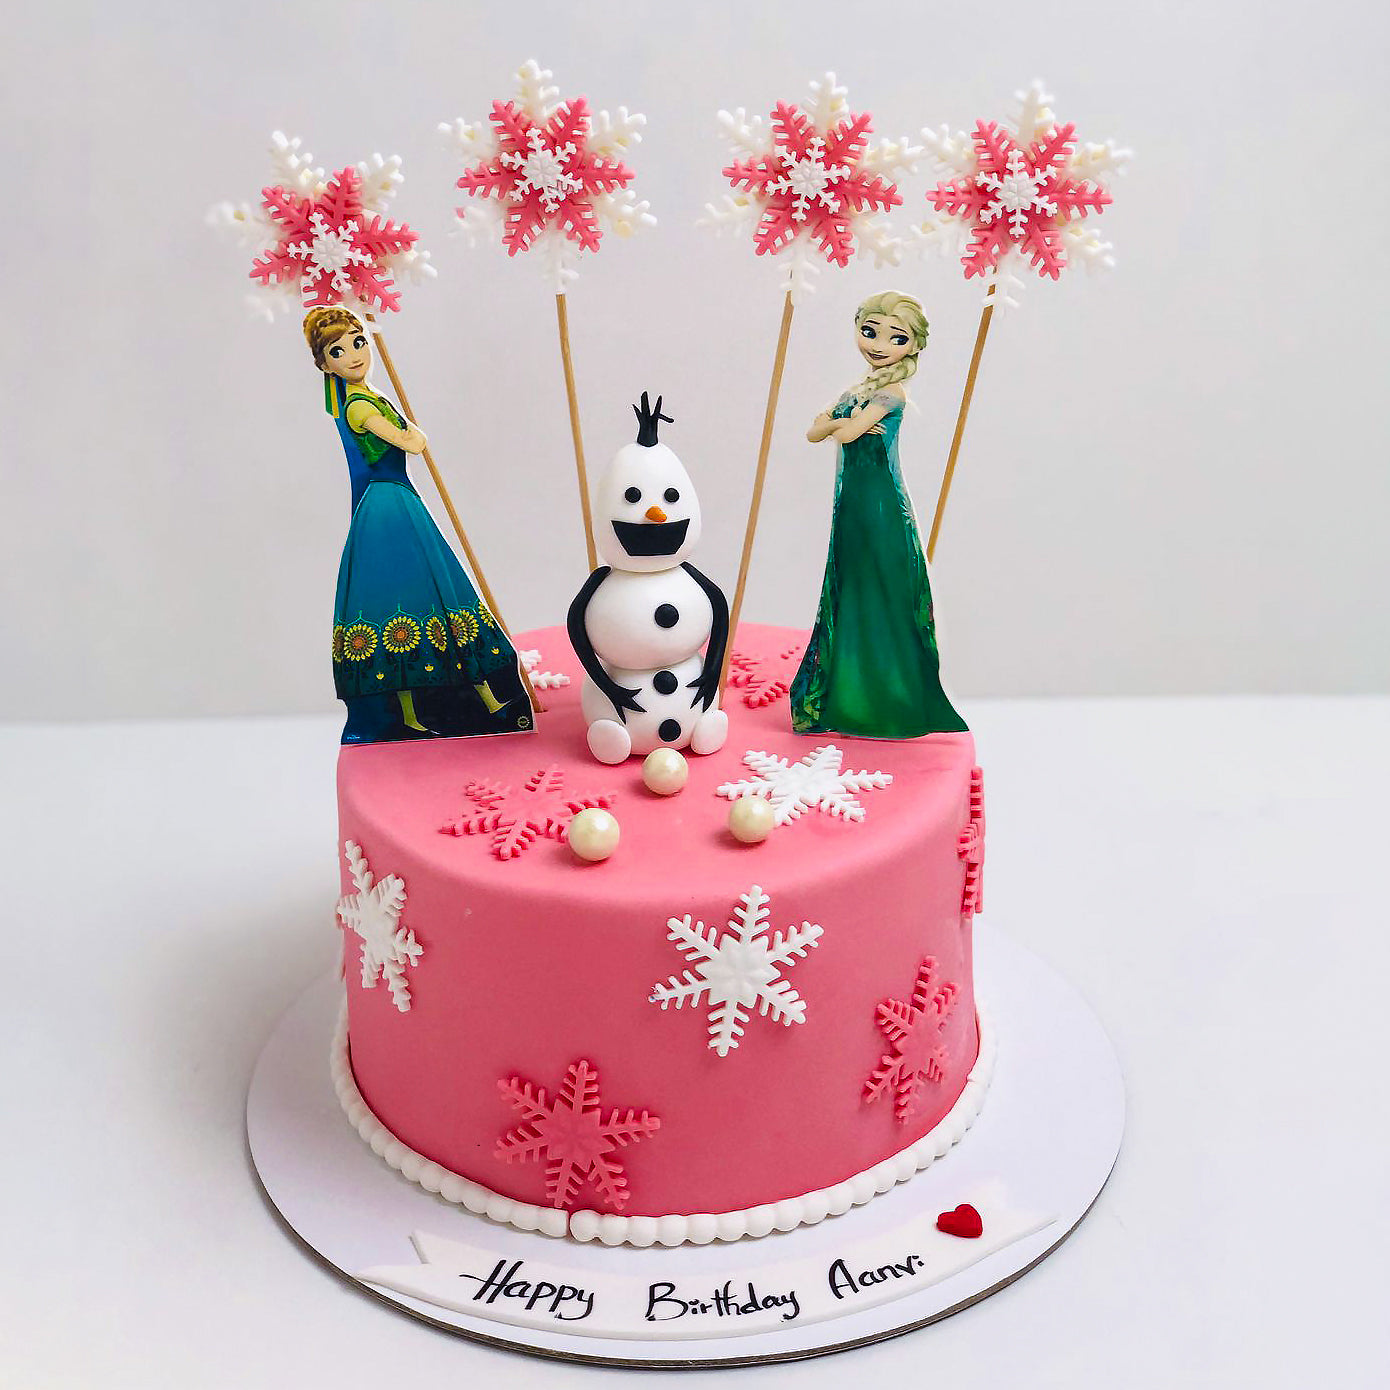 Order a Spectacular Frozen-themed Birthday Cake | Gurgaon Bakers